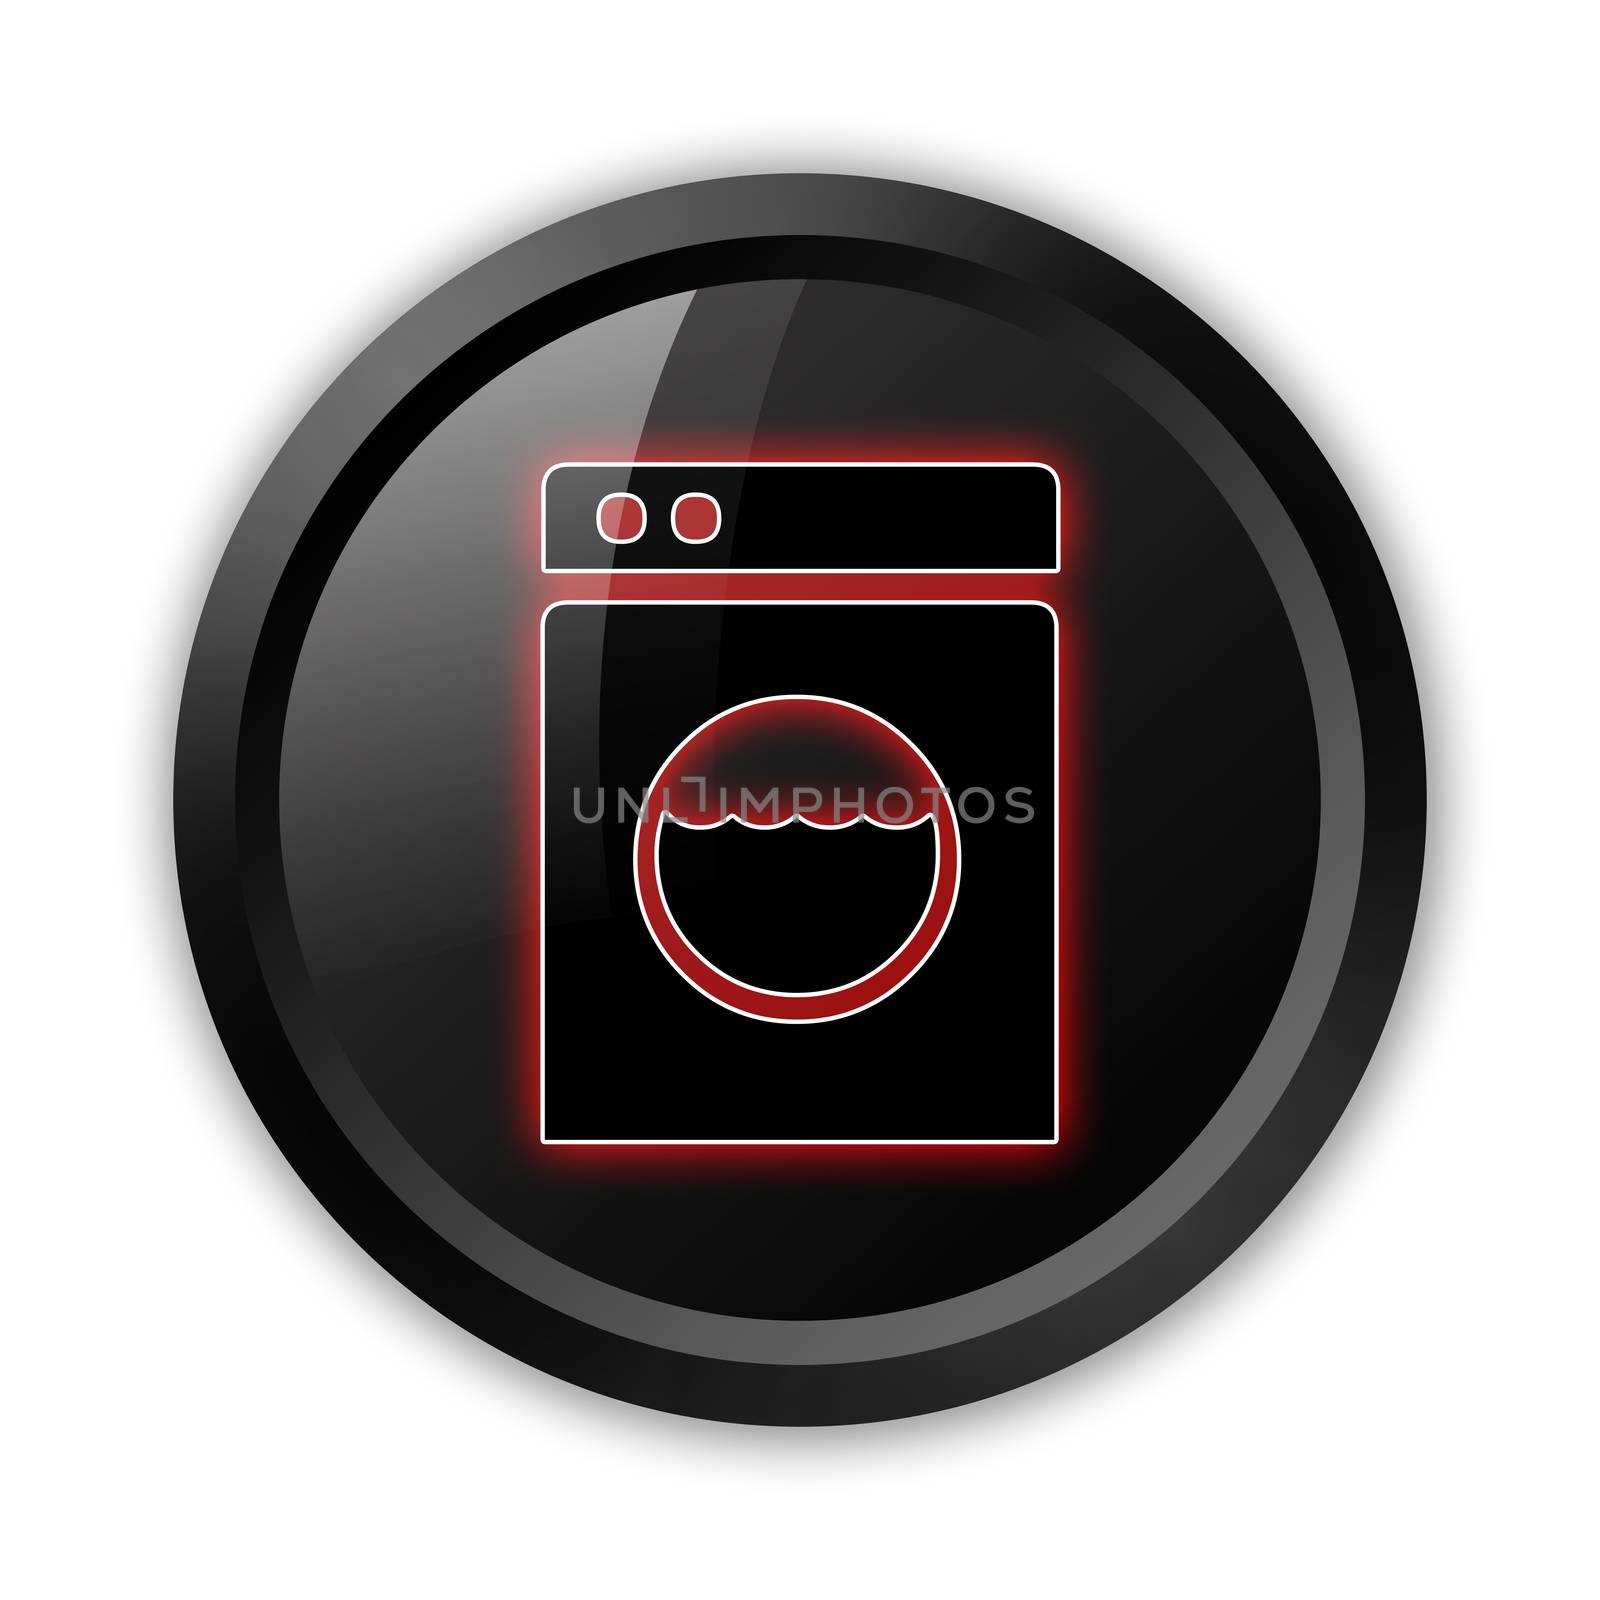 Icon, Button, Pictogram with Laundromat symbol